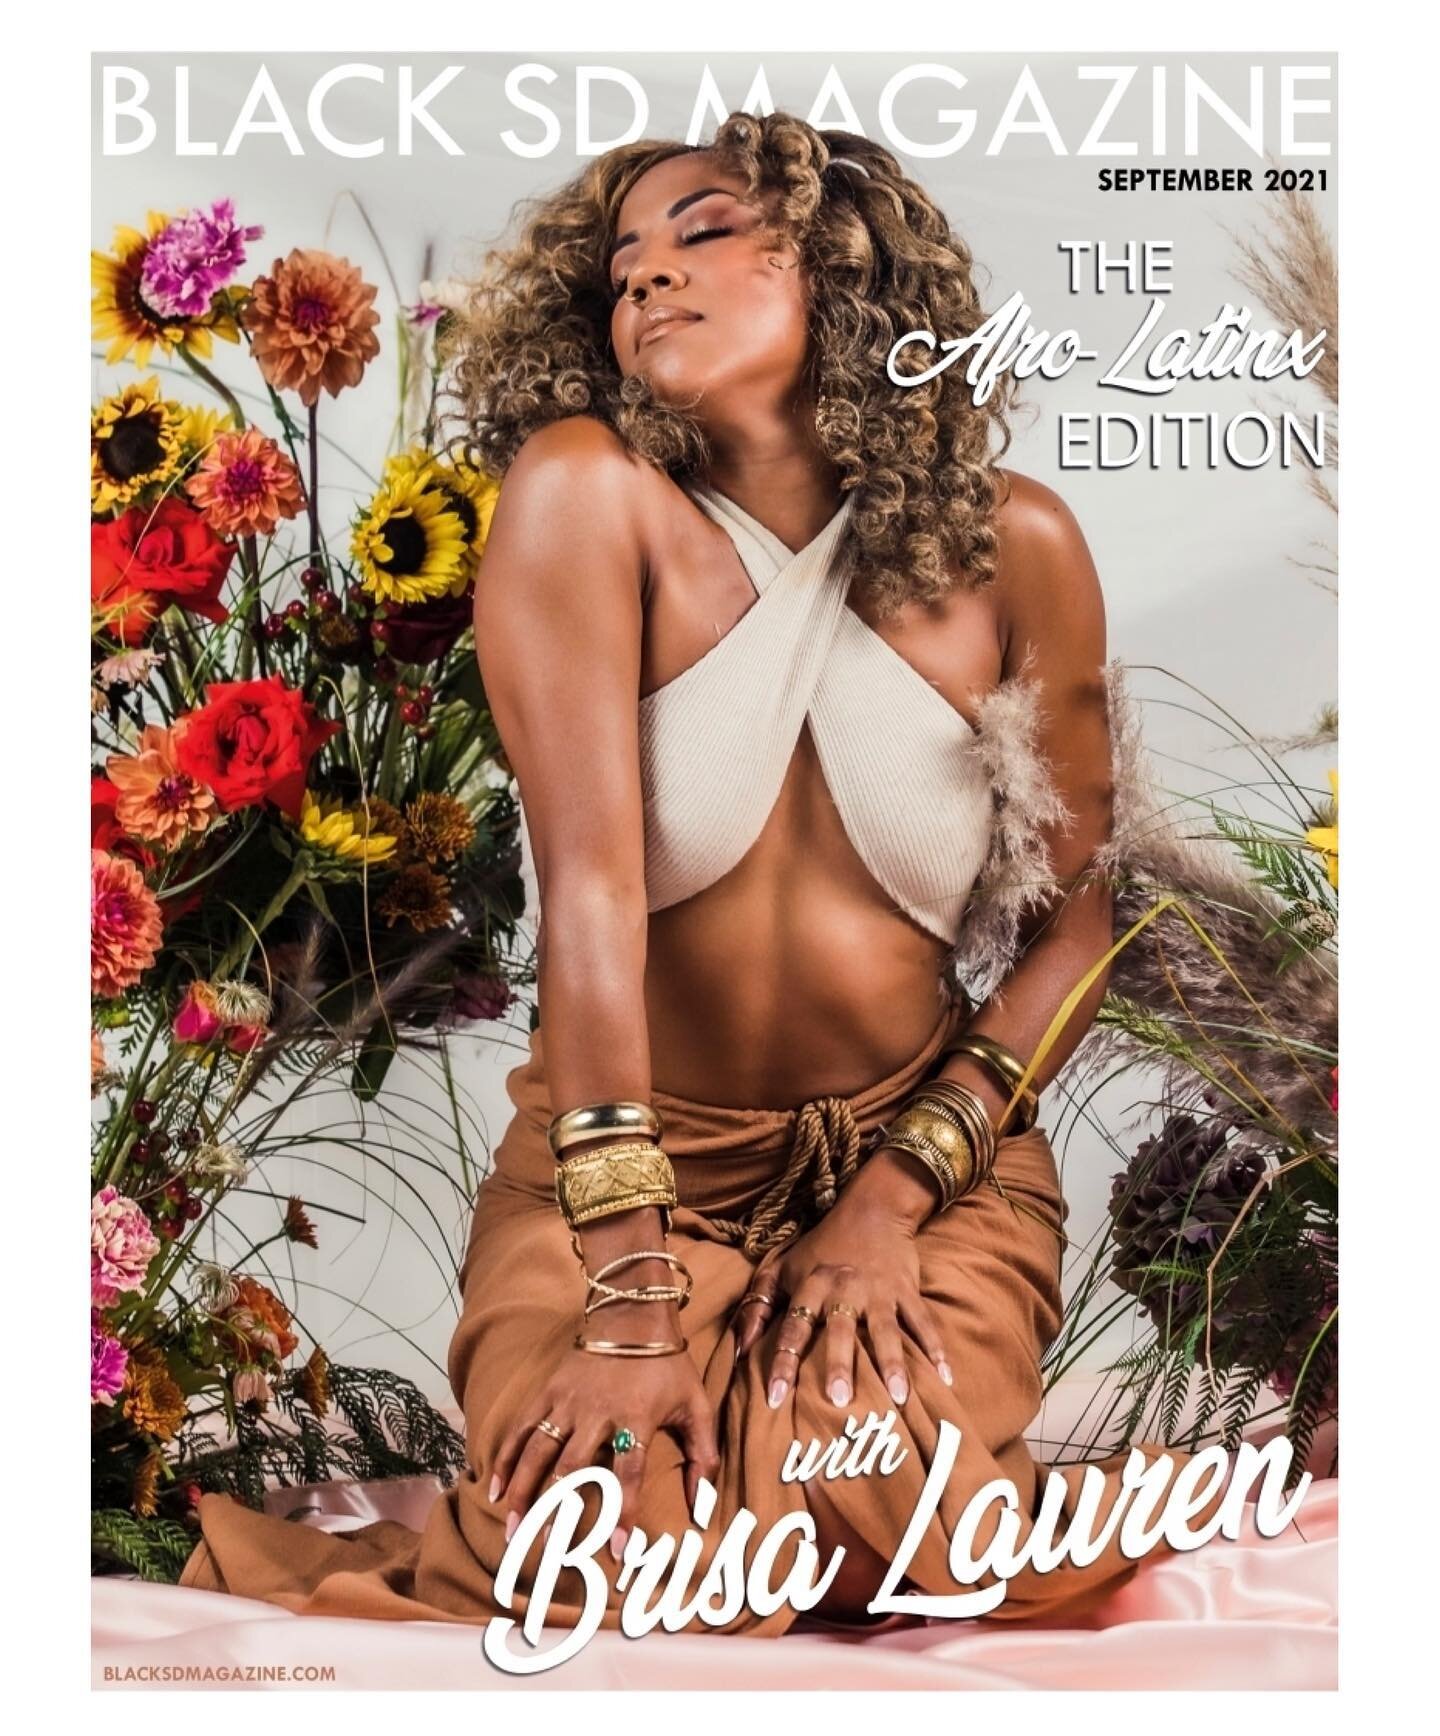 First Magazine Cover. Honored is an understatement ✨ Black San Diego Magazine&hellip;
The Afro-Latinx Edition September 2021 

**LINK IN BIO FOR PURCHASE**
.
.
.
.
.

&bull;CEO and Publisher of @blacksdmagazine, &bull;Michael Cox 
&bull;Photographer 